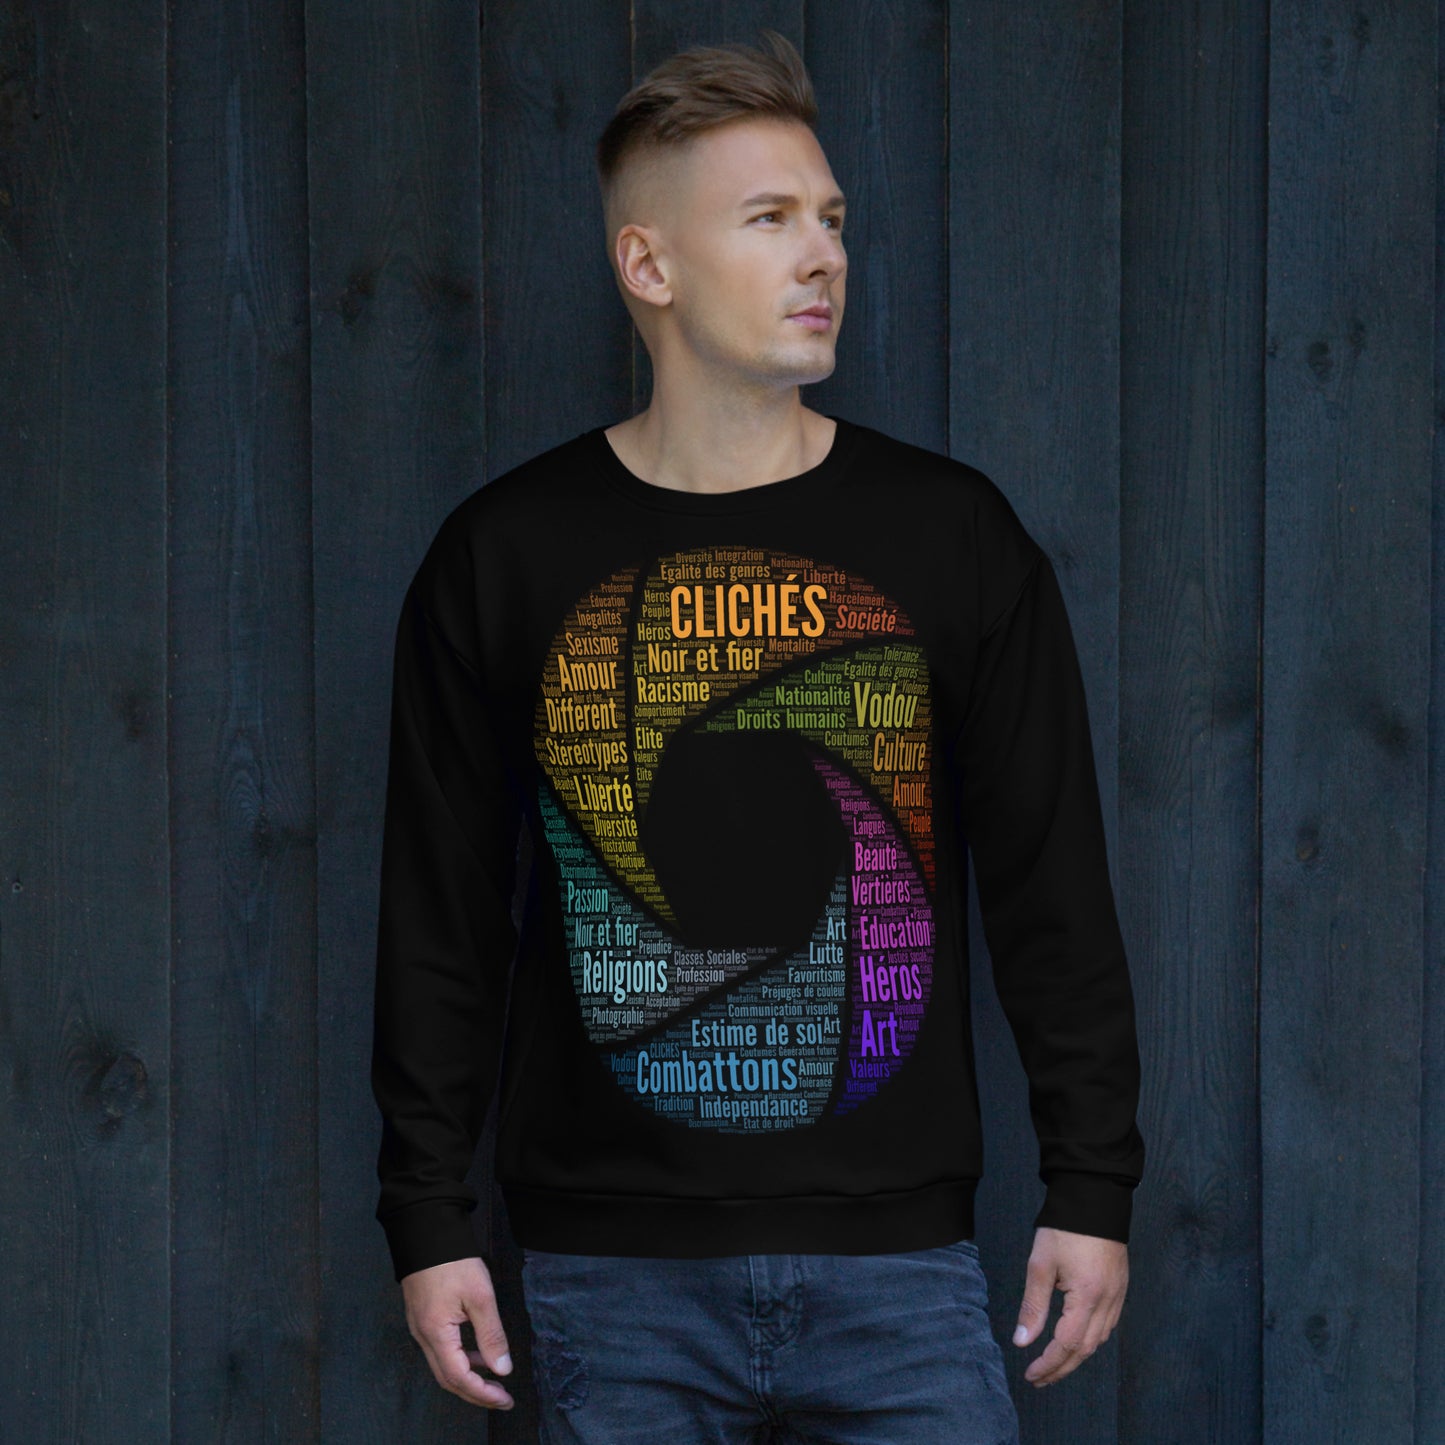 Stereotypes-photography-Gender equality-creativity-word cloud-motivation-patriotism-black and proud-sweatshirt